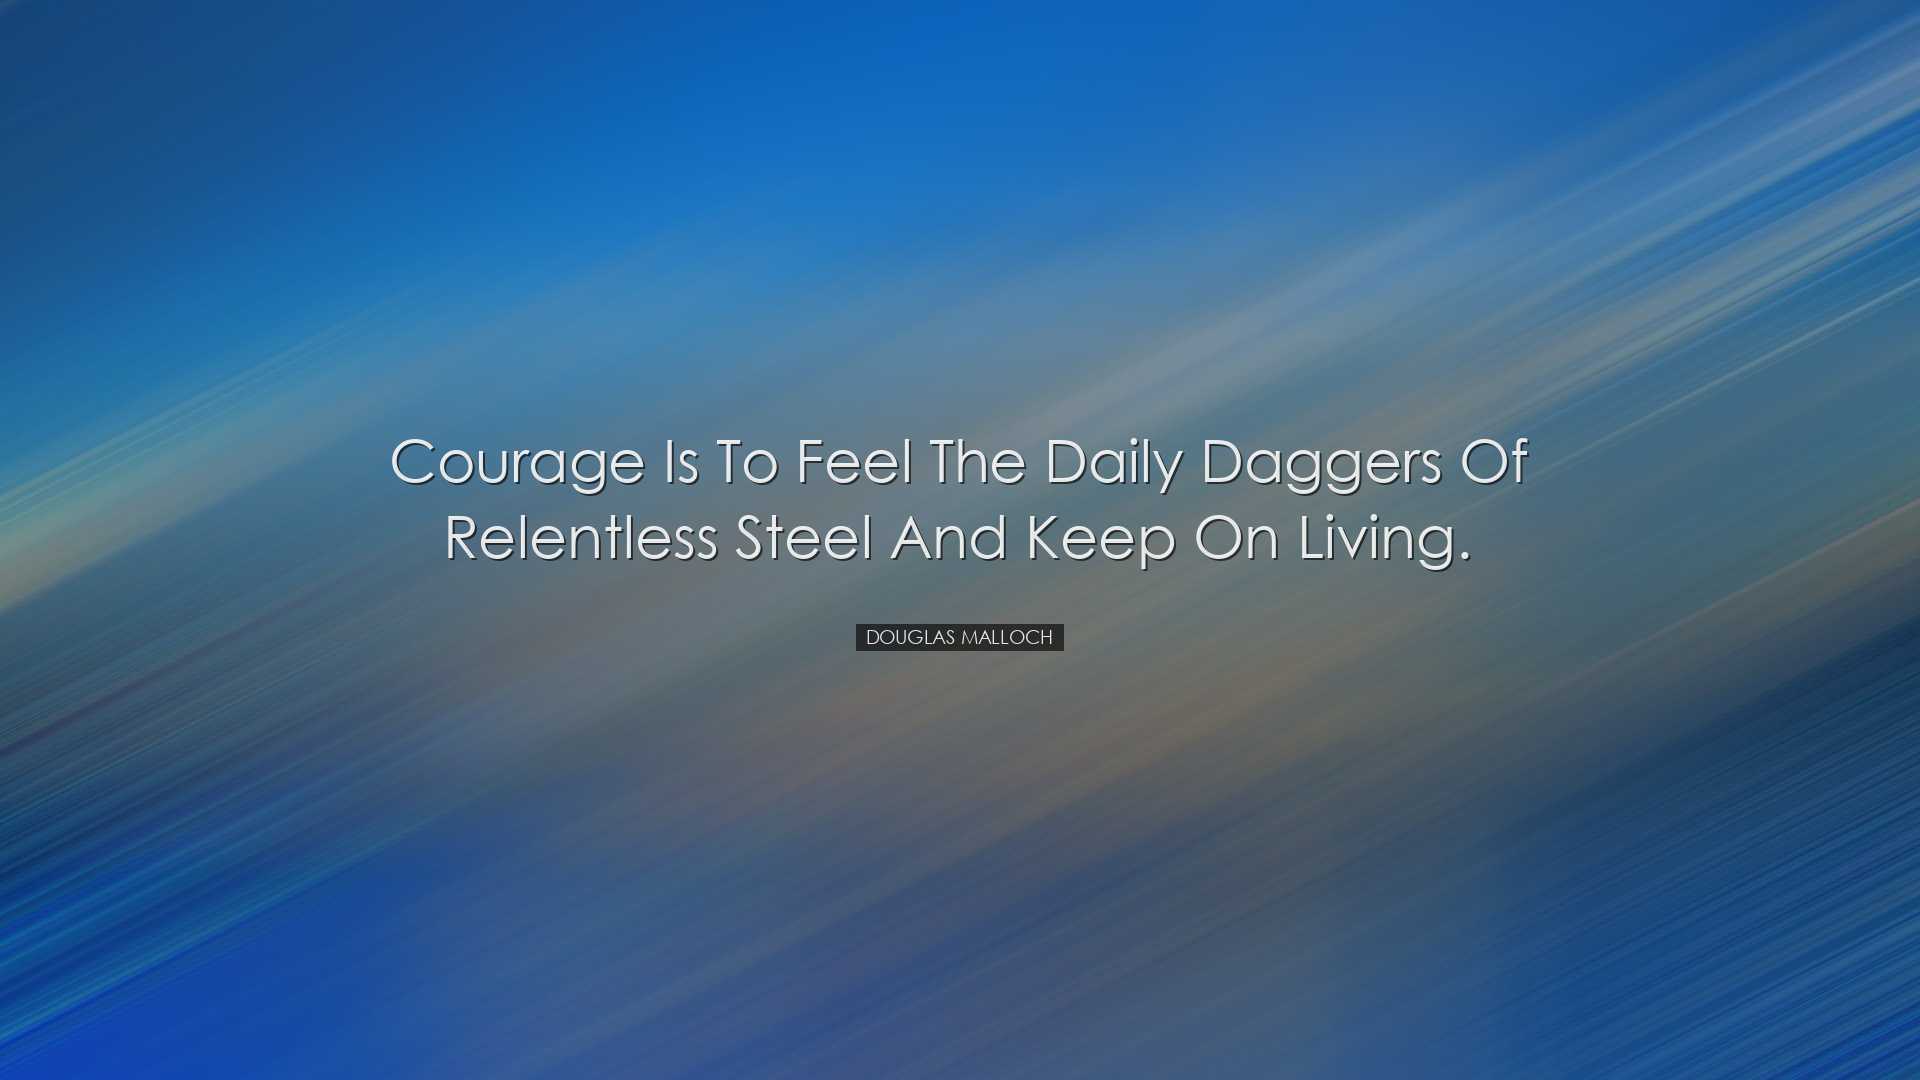 Courage is to feel the daily daggers of relentless steel and keep